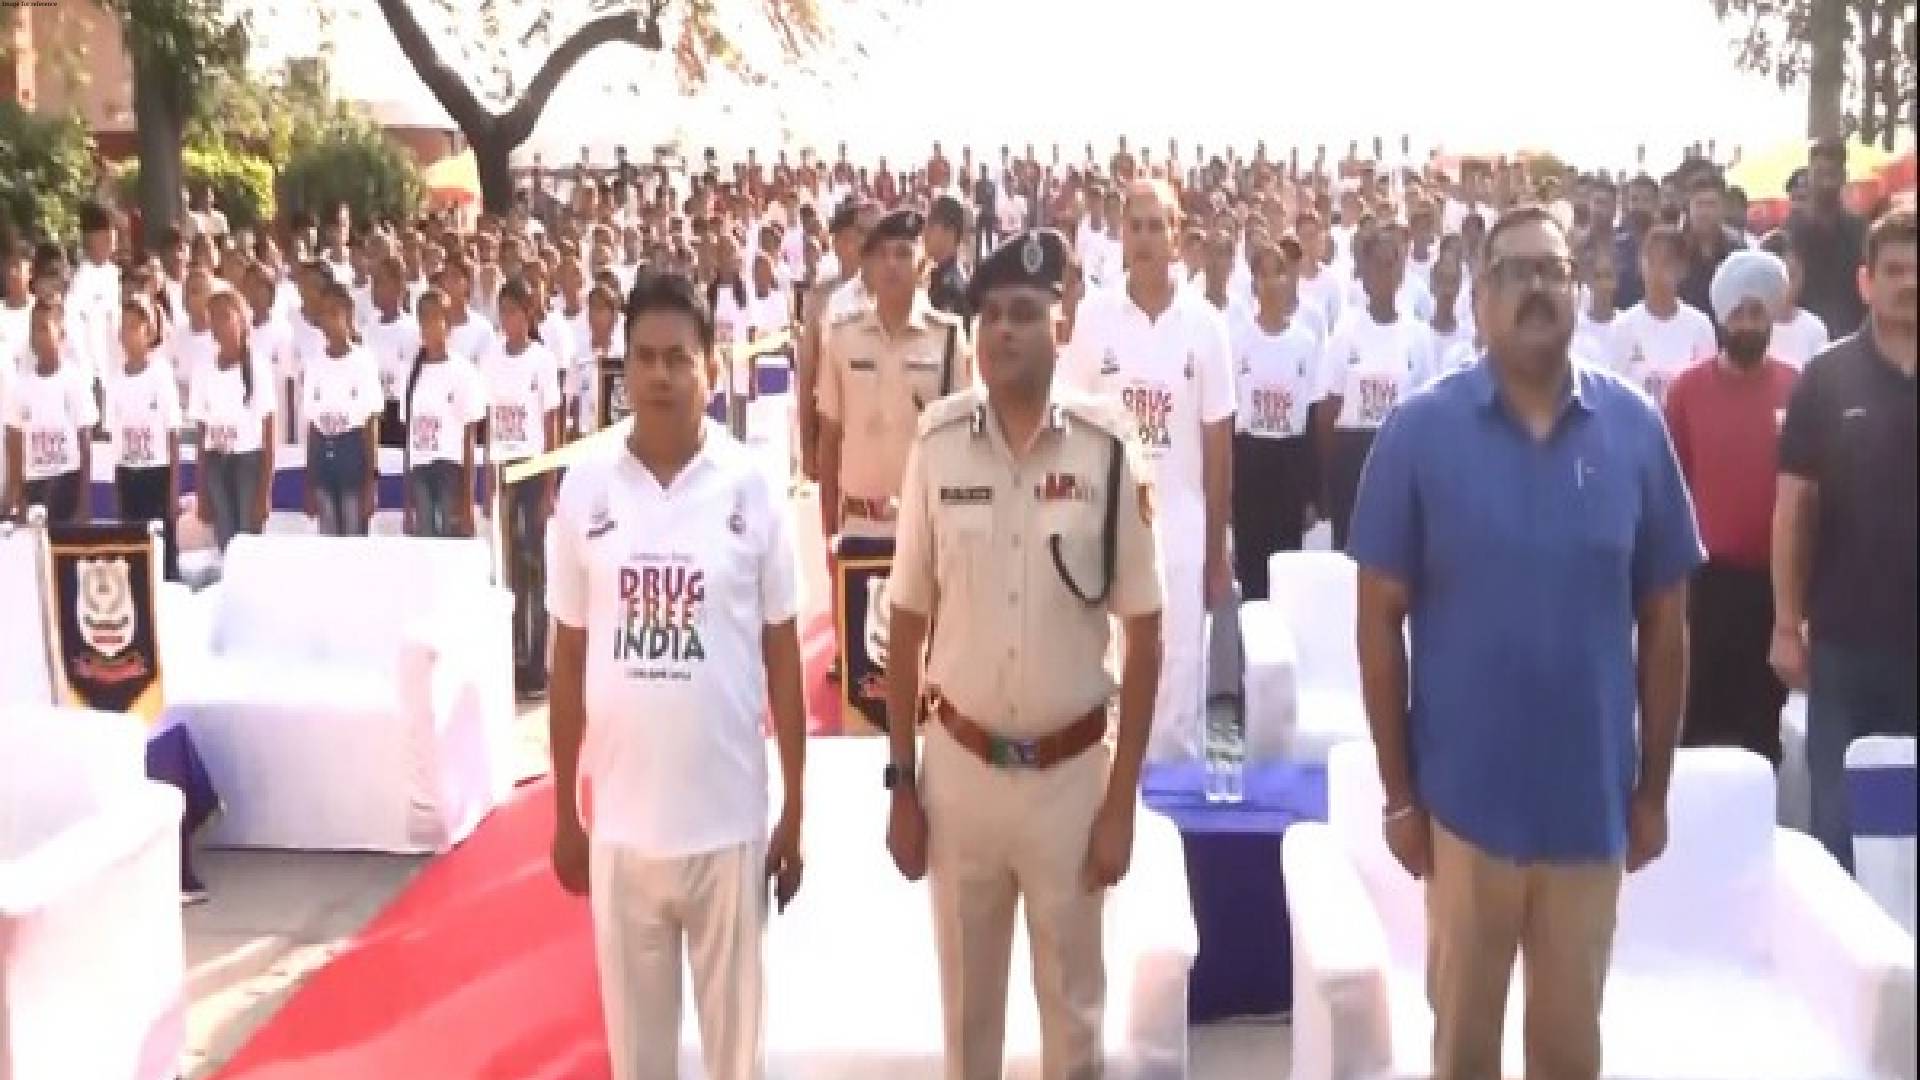 Chandigarh police, NCB organise walkathon at Sukhna Lake to spread awareness about drug abuse